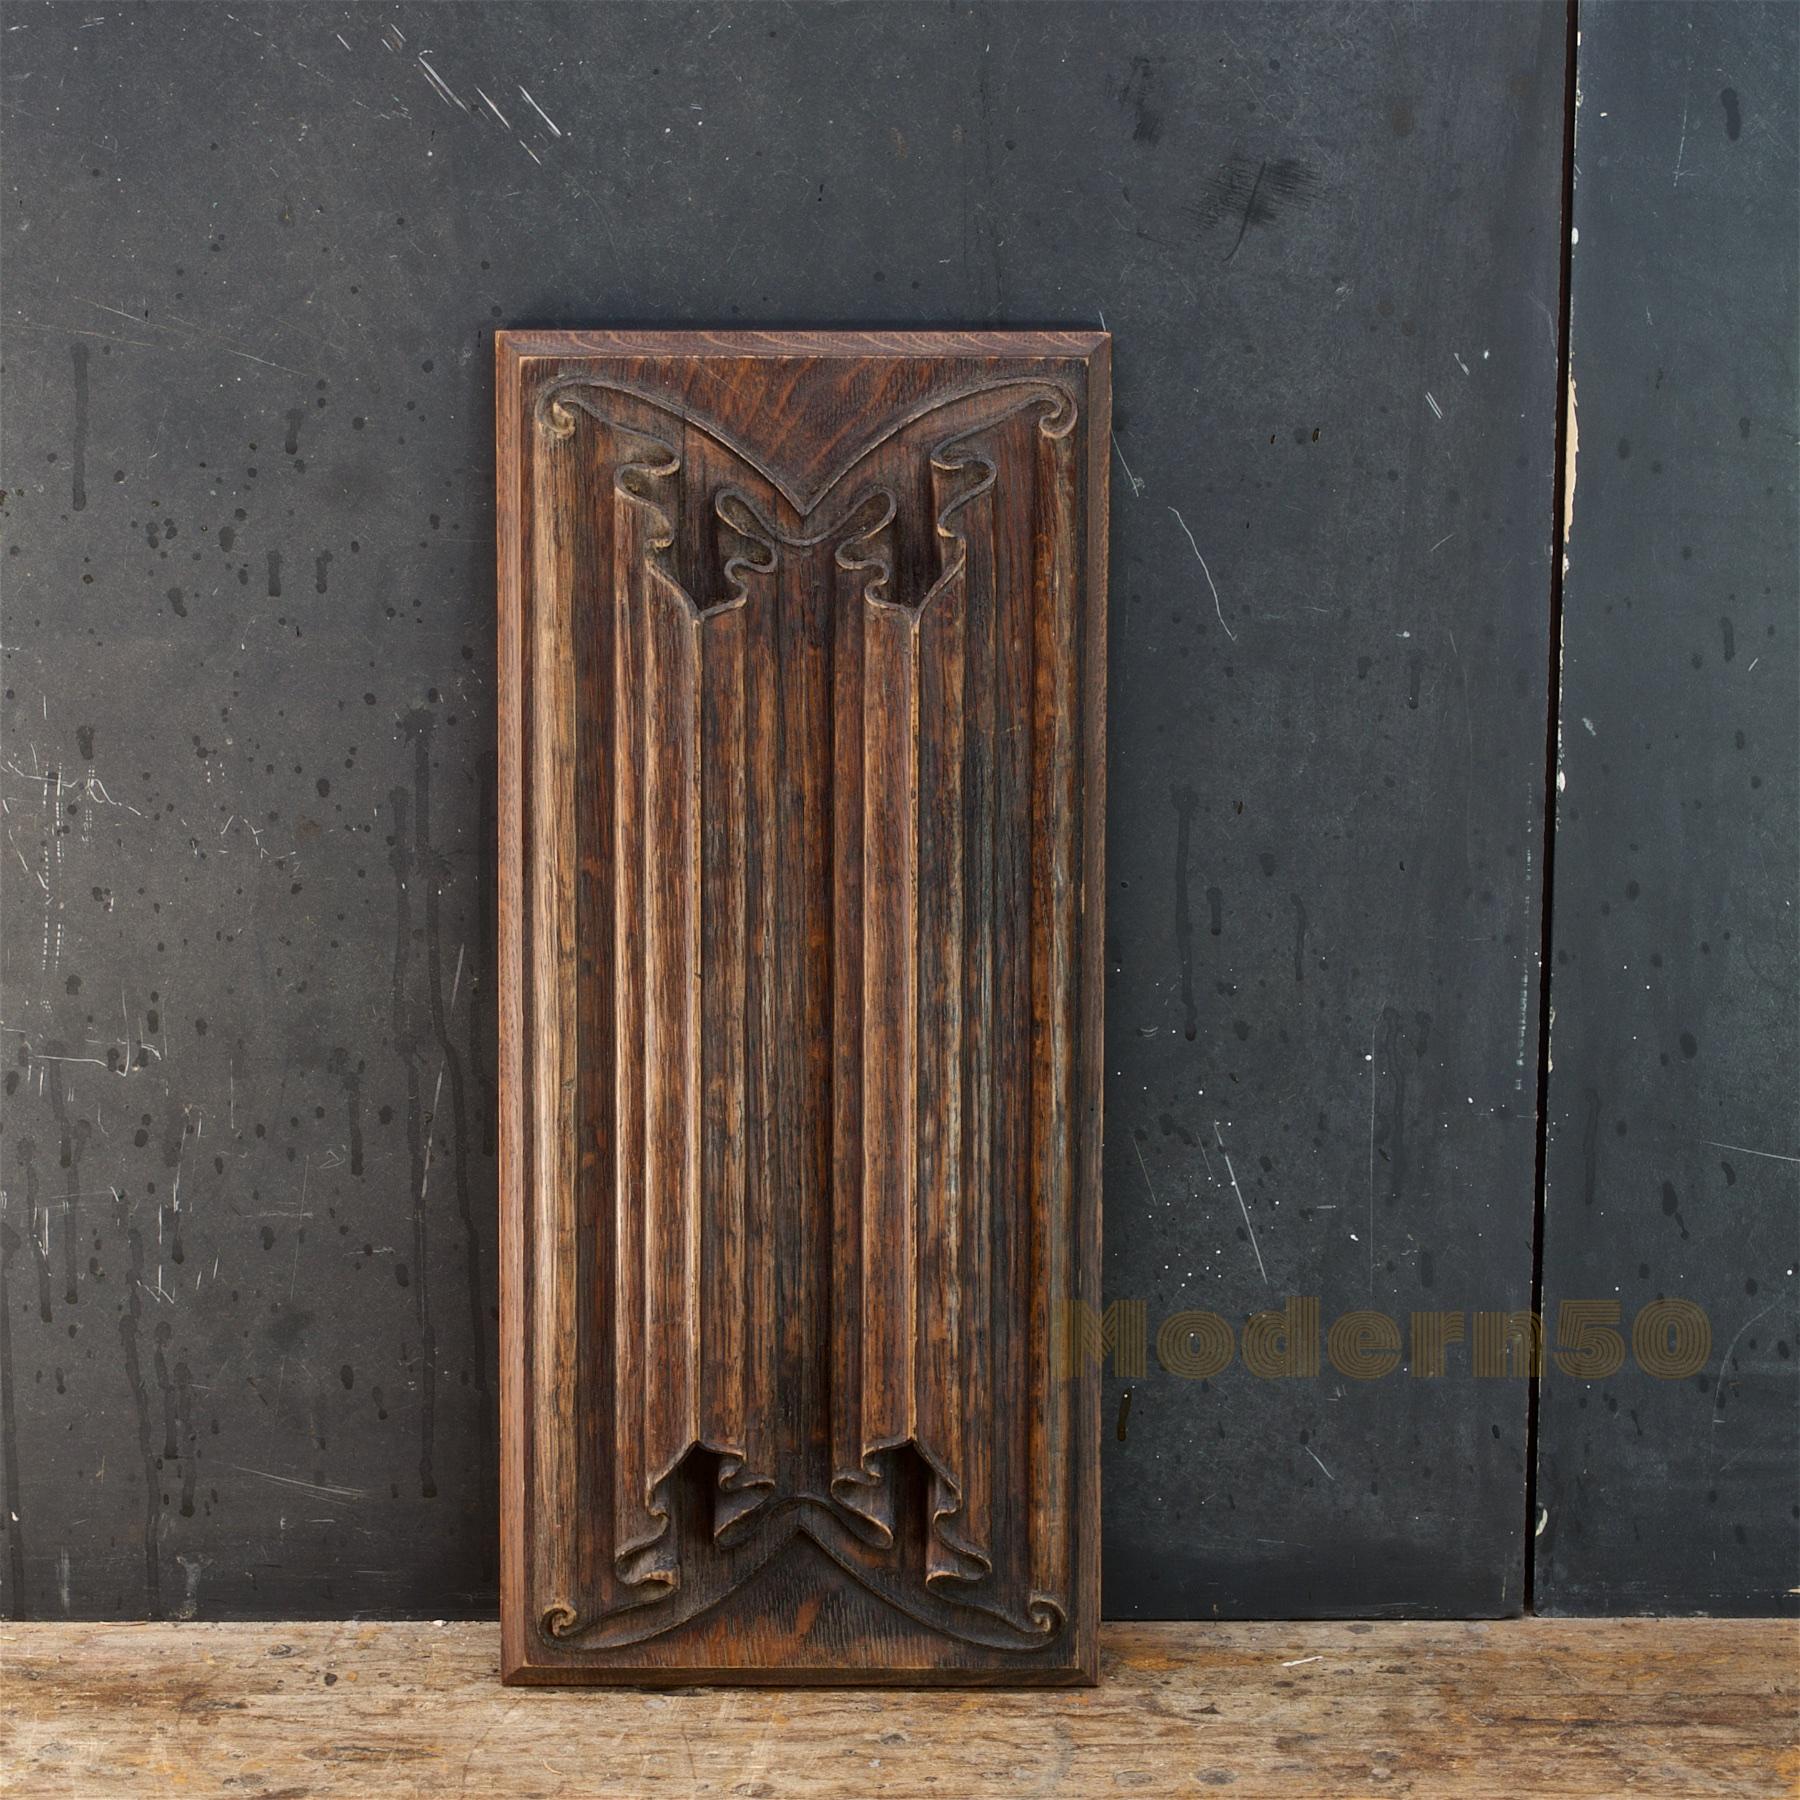 Late 19th century decorative wood panel, hand carved curtain relief.